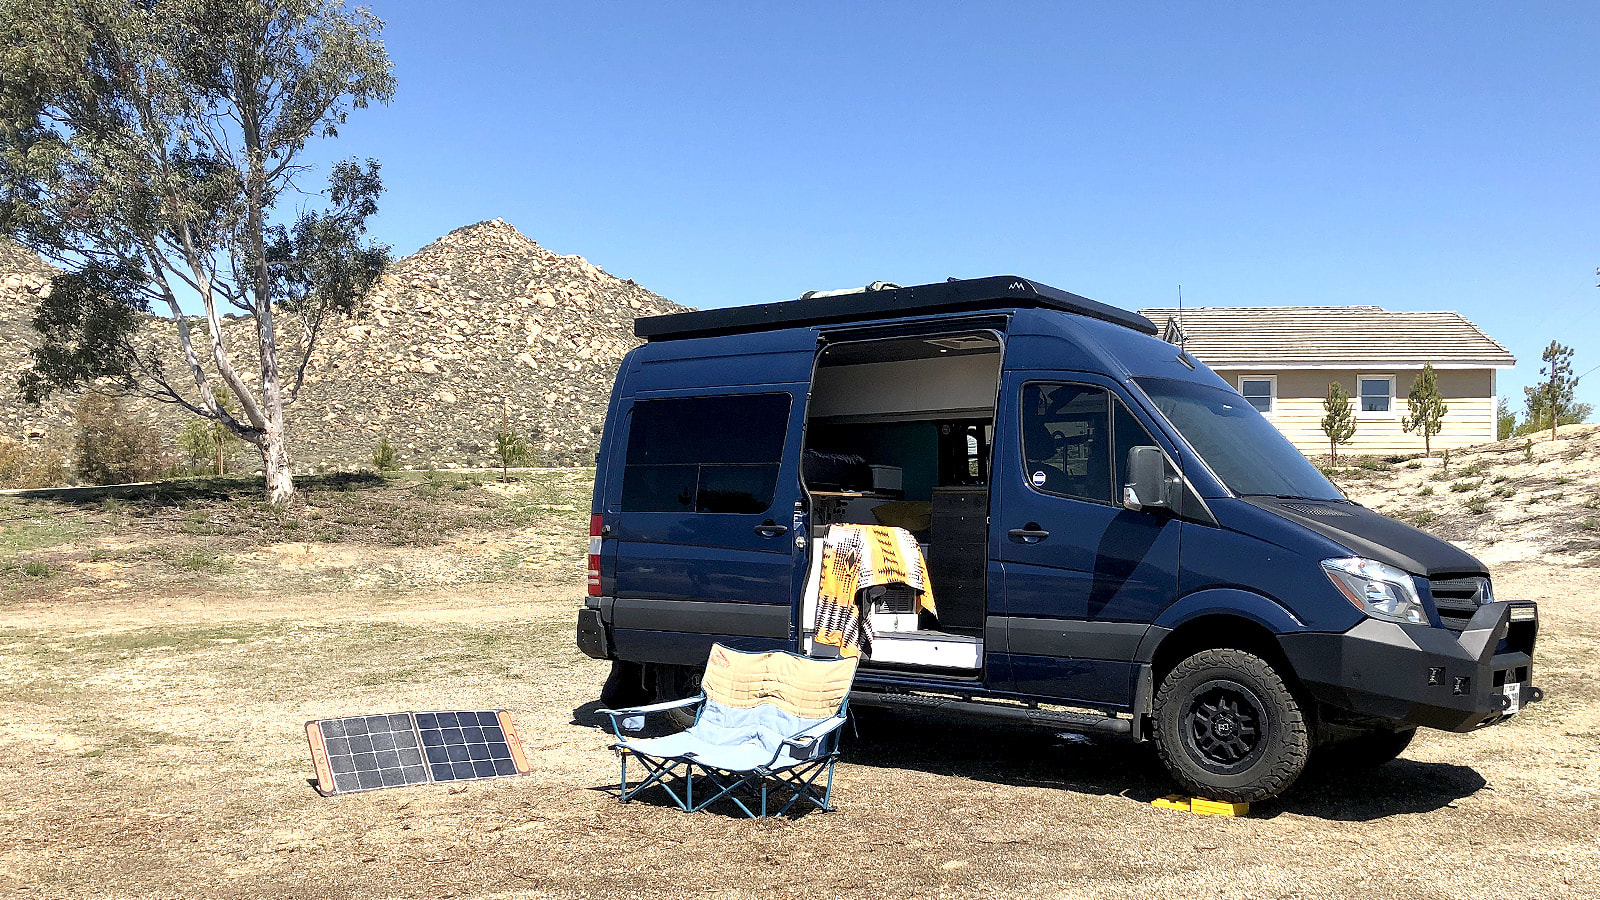 Shadow Hills is perfect for vans, trailers or RVs - just ask @van.there 🚐